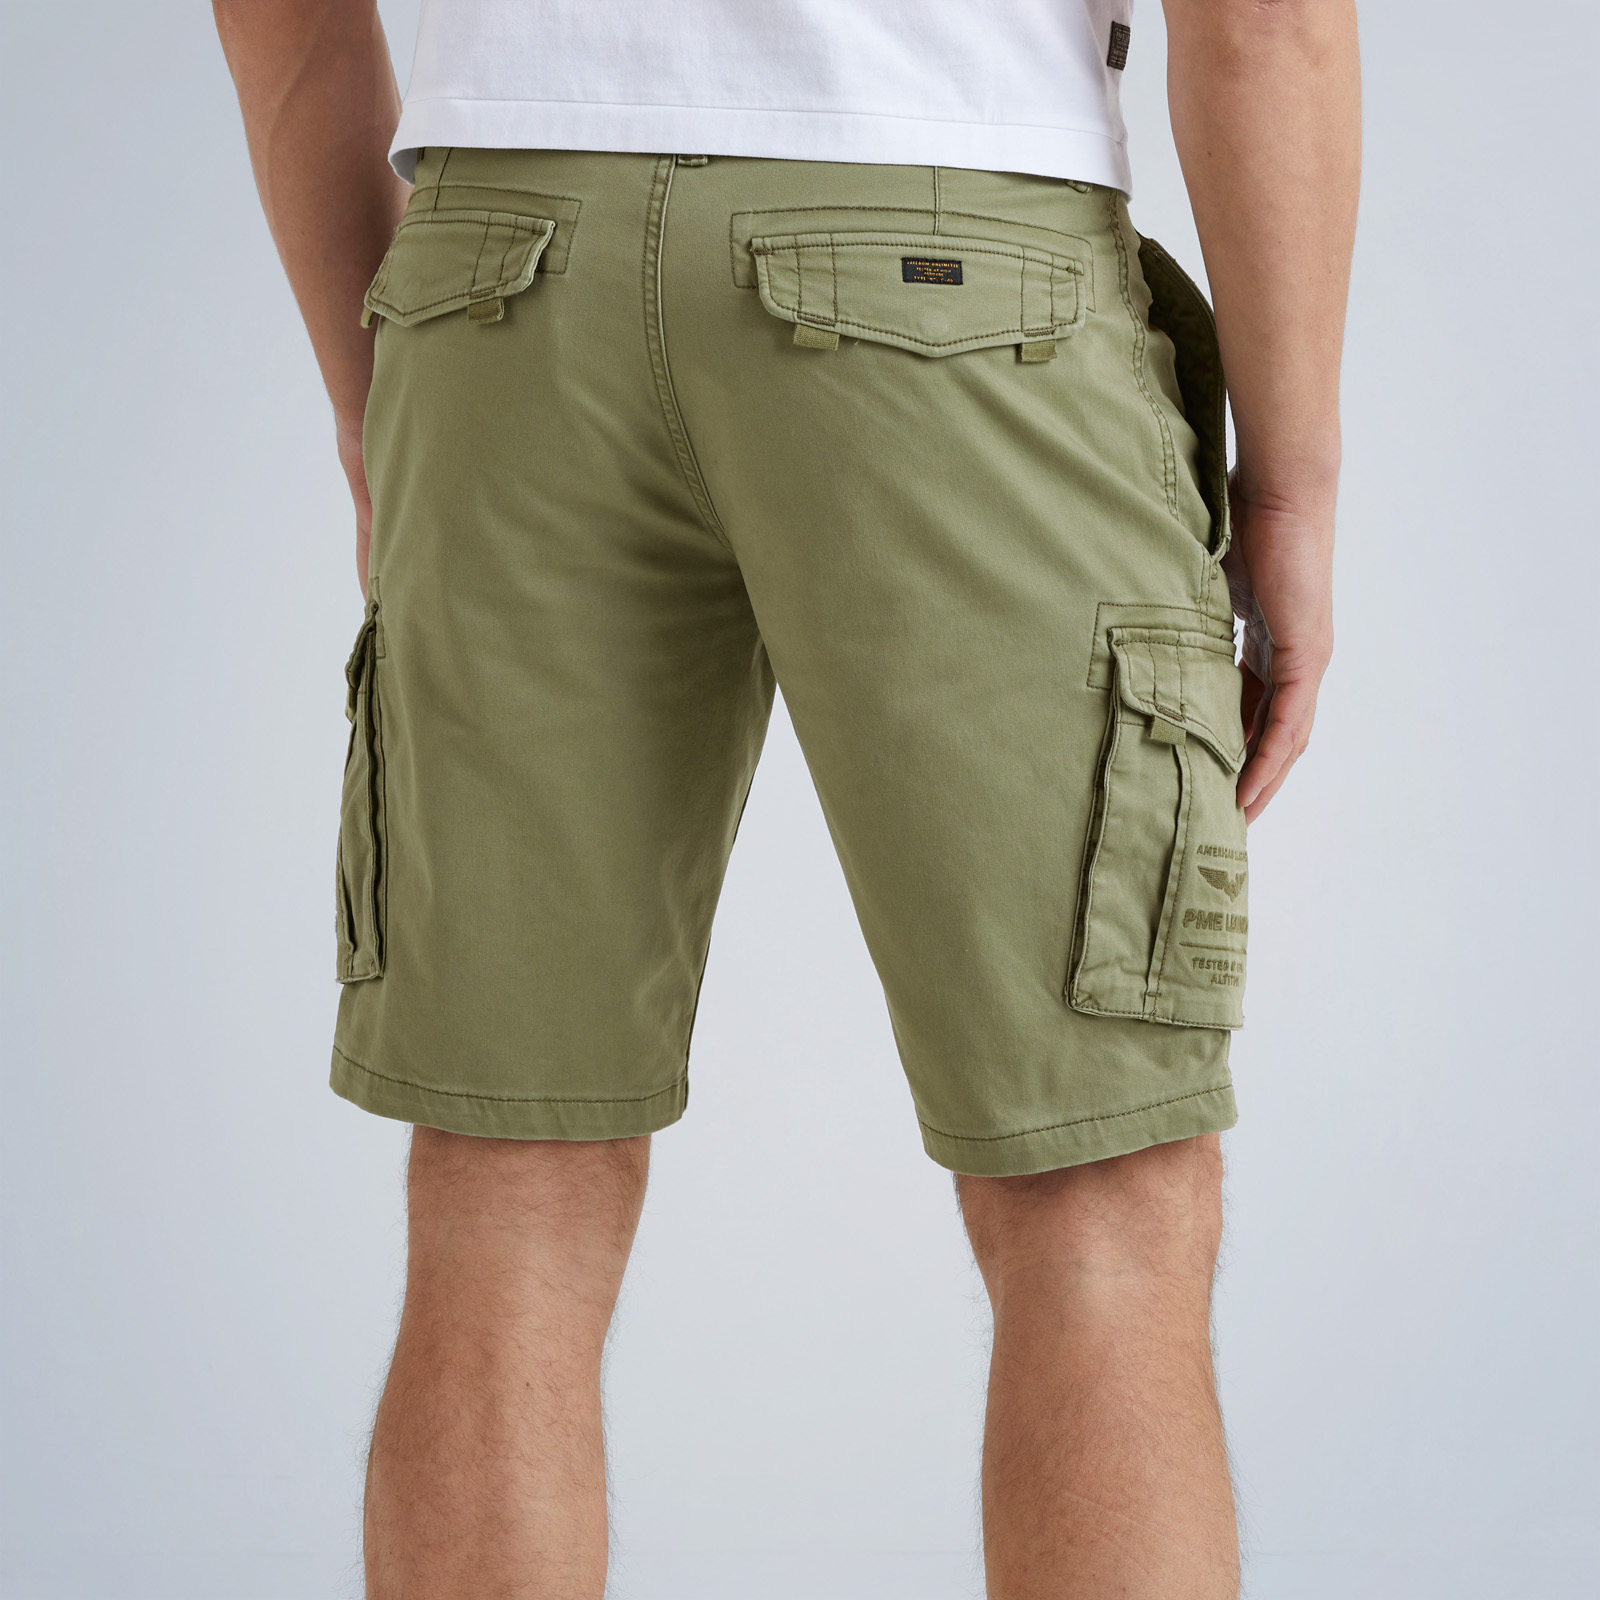 Twill | Stretch Cargo PME Short shipping | LEGEND Free and returns